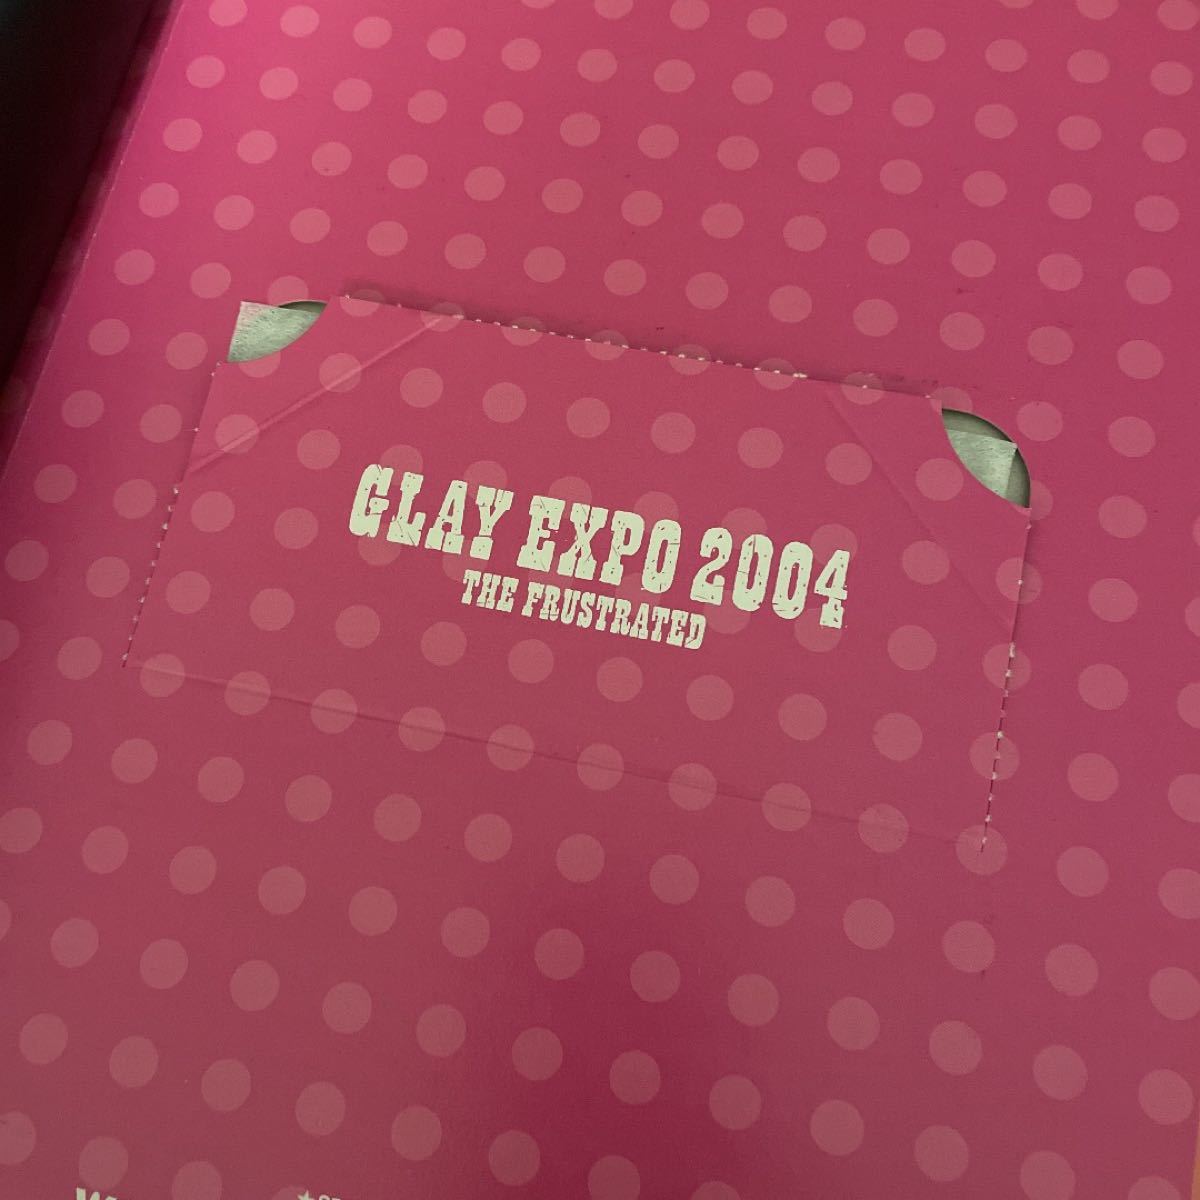 GLAY EXPO2004 THE FRUSTRATED パンフレット